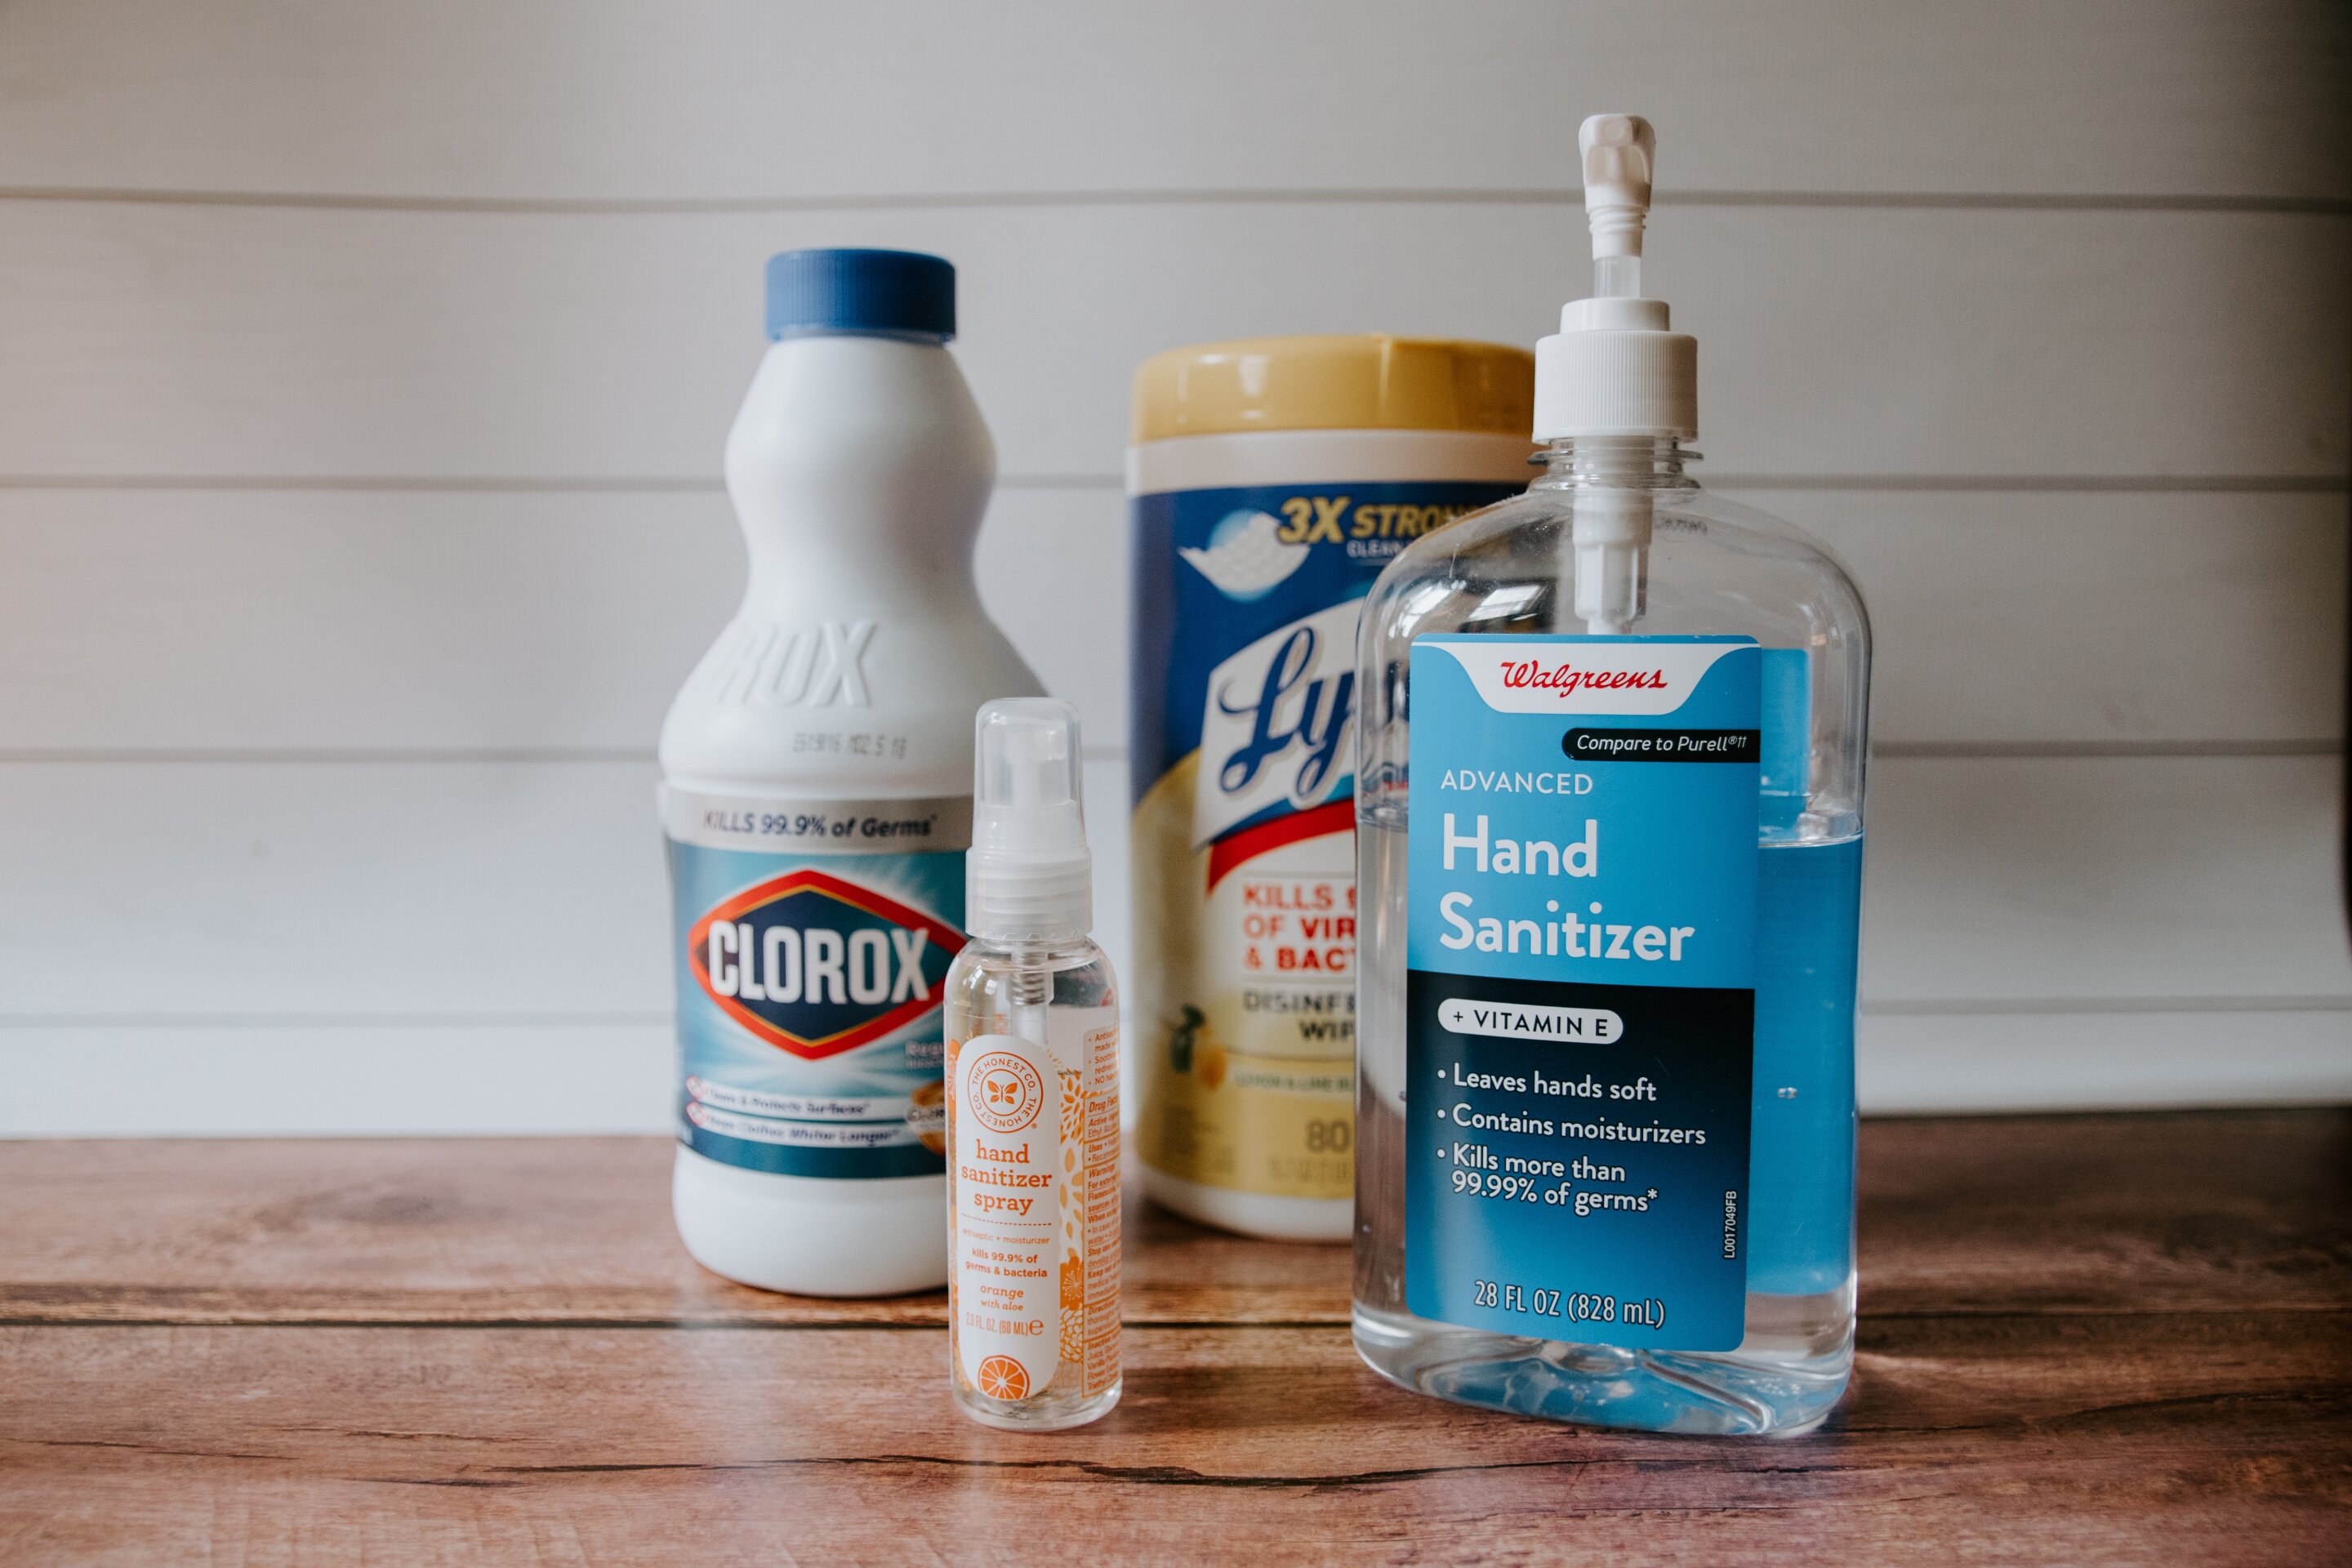 Clorox products are scarce—and will be for months. Blame cyber criminals